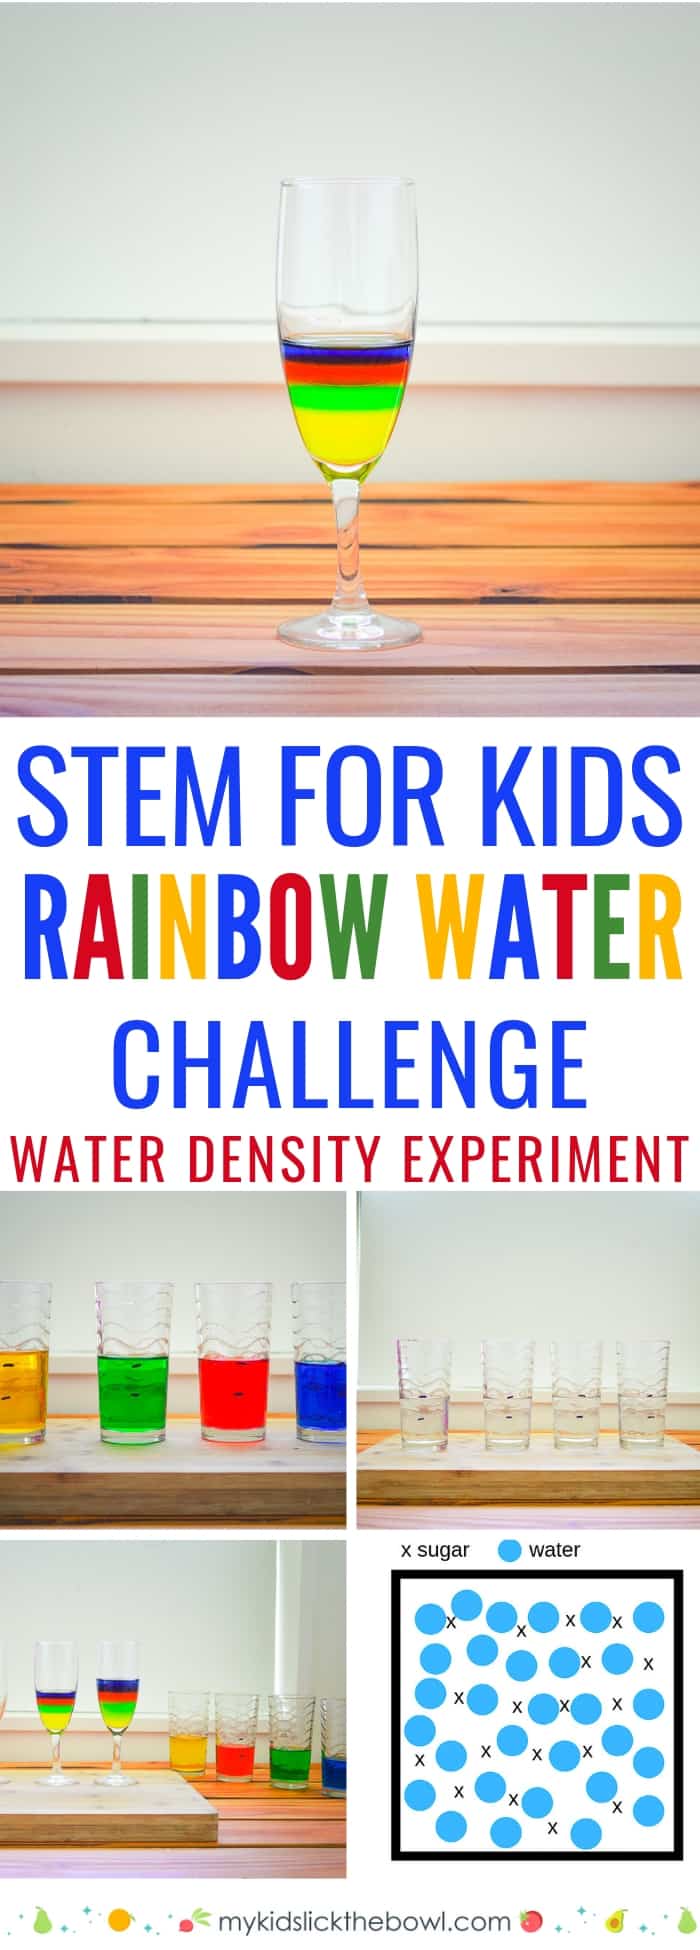 Sugar Water Density Experiment -Rainbow layered water in a glass